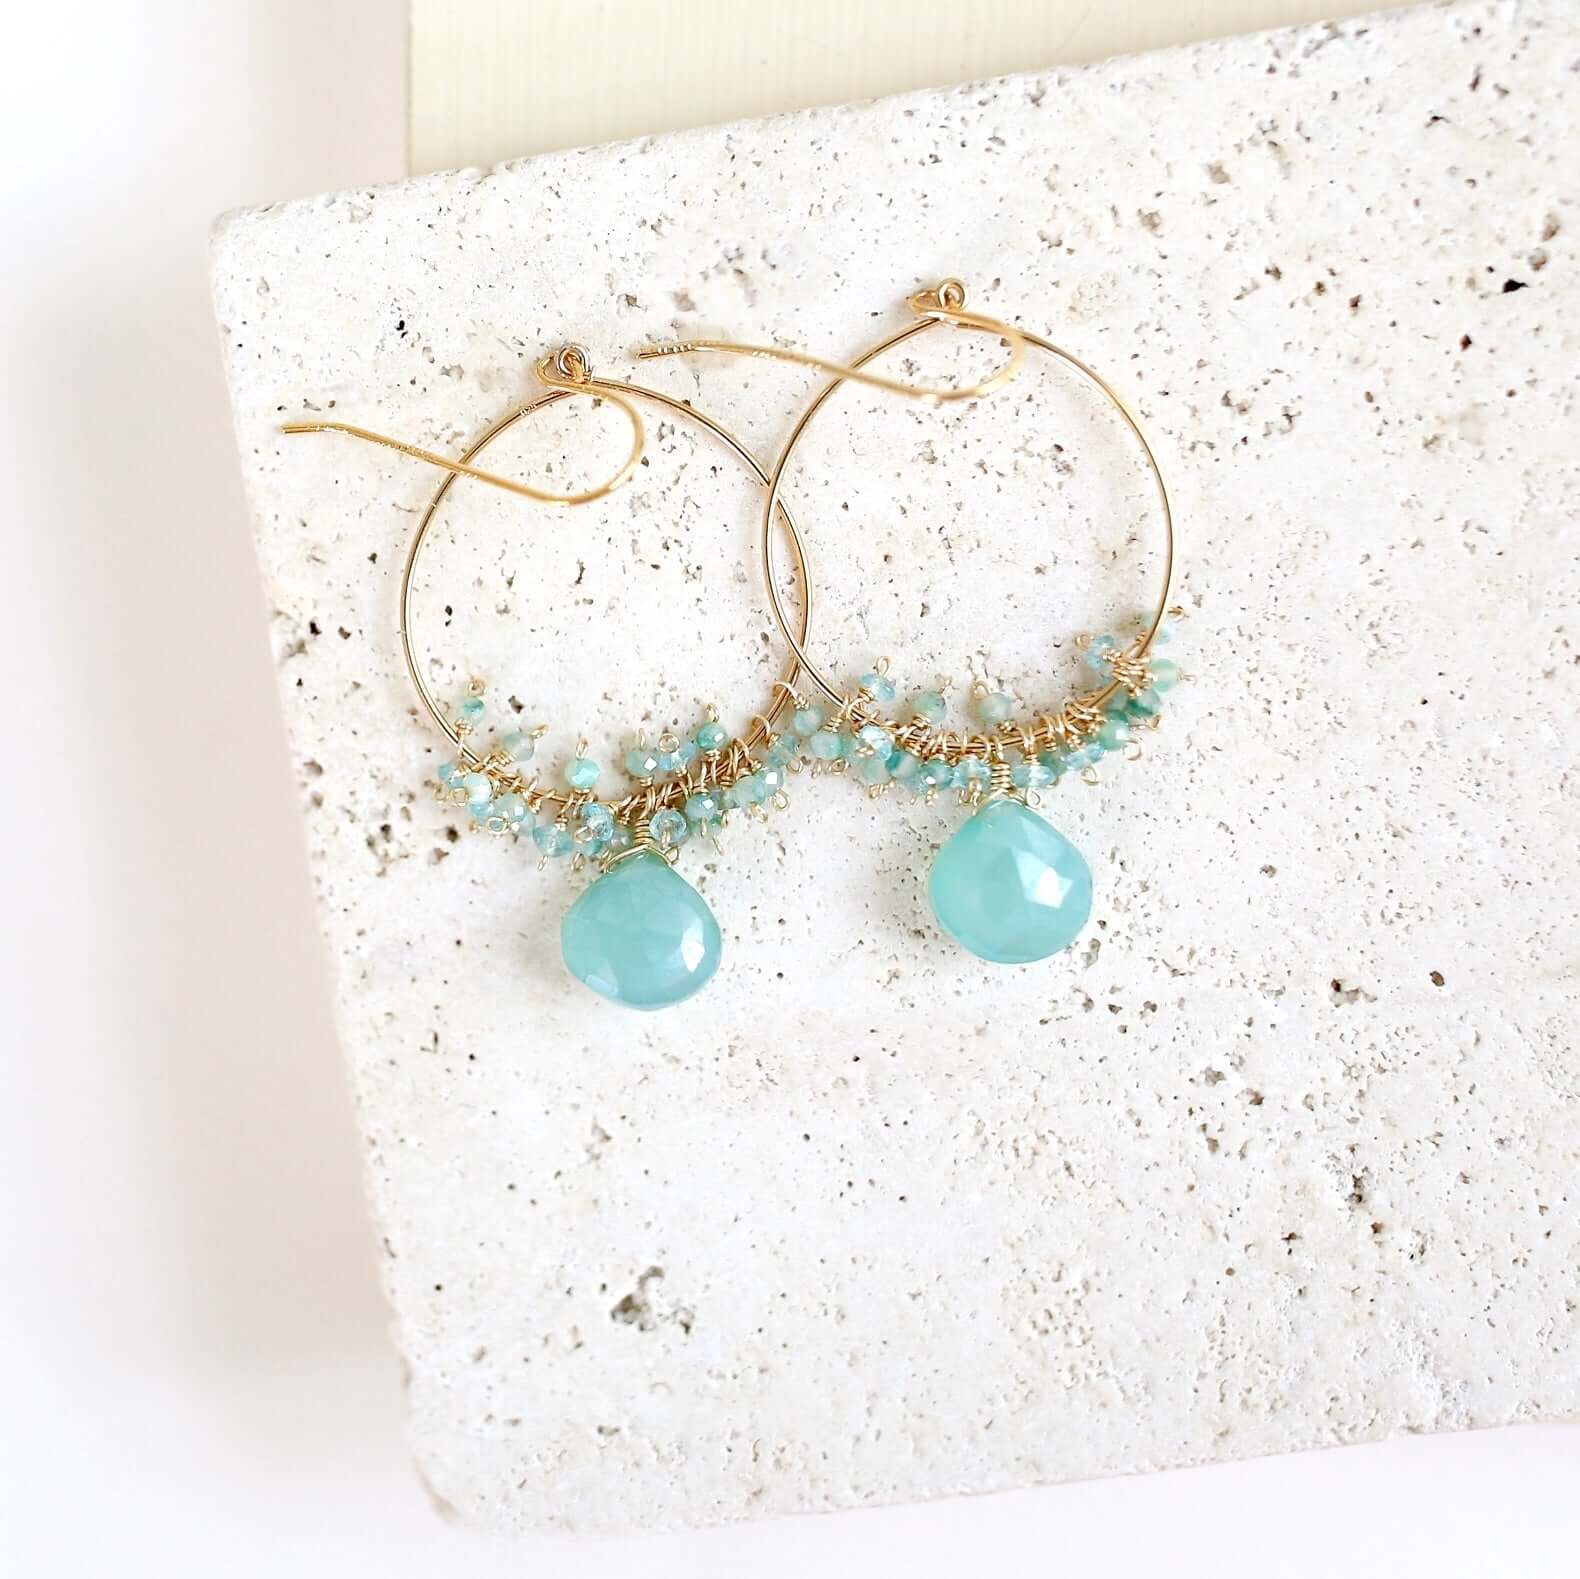 Swing Earrings featuring Mystic Aqua Chalcedony gemstones and French hooks for a touch of effortless elegance